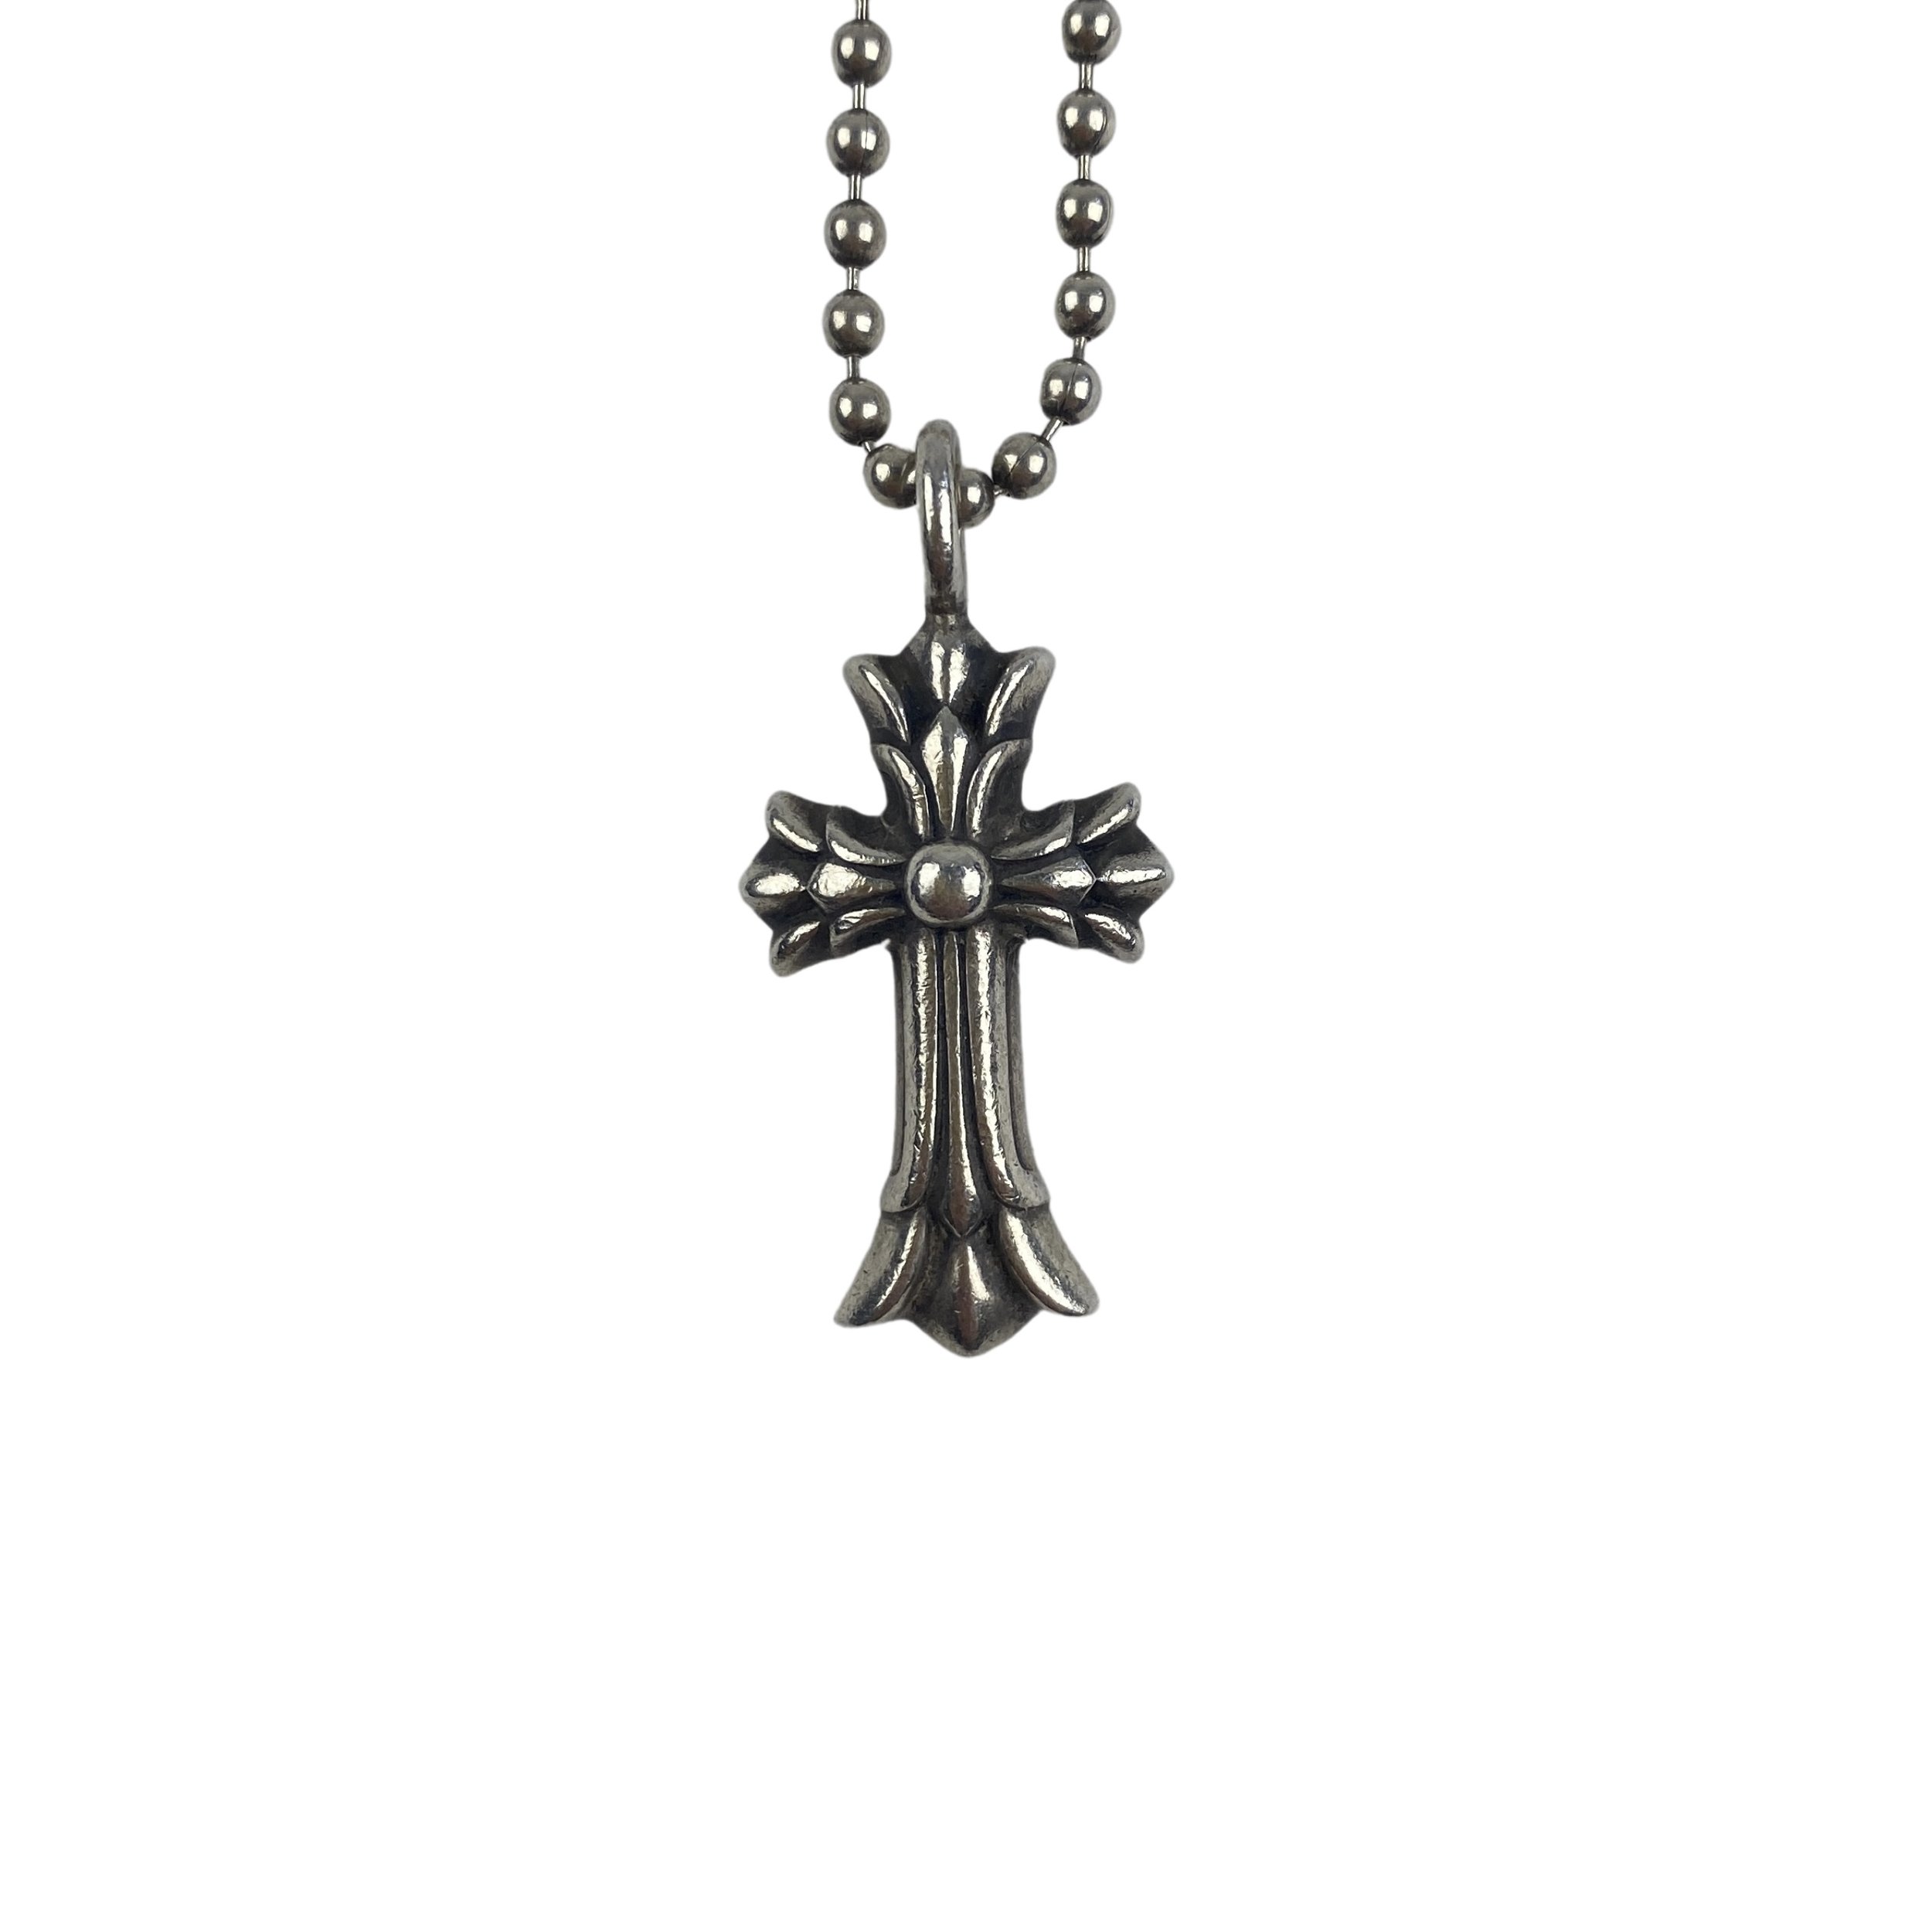 MARKED EU: Chrome Hearts Double Crosses Necklace